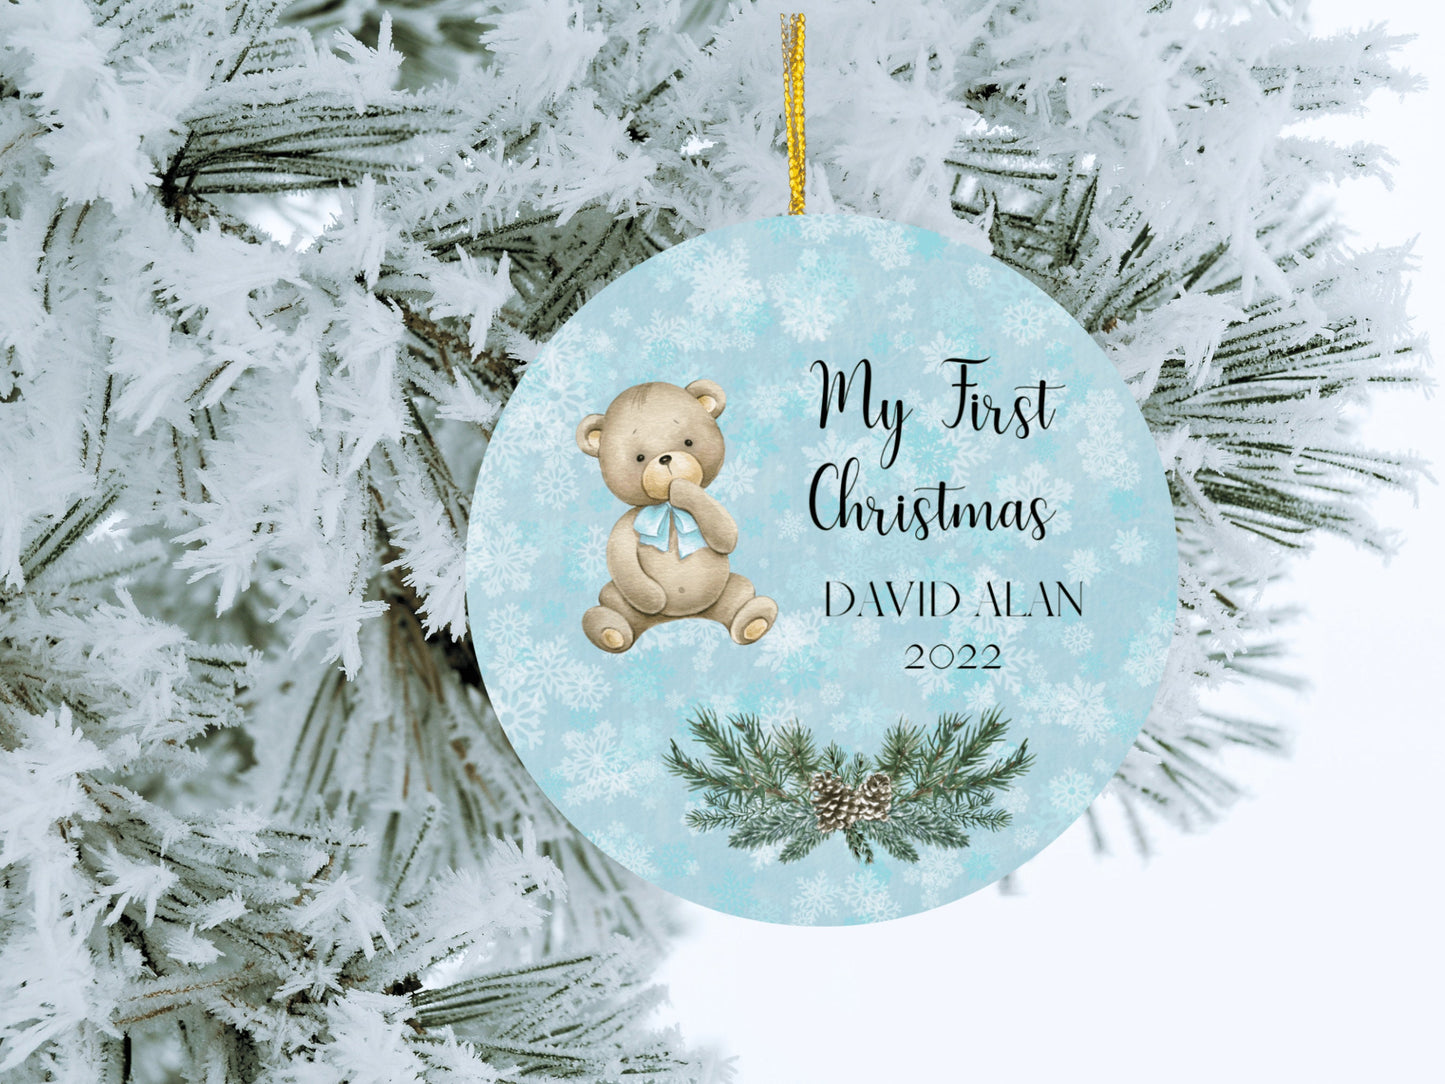 Baby's First Christmas Ornament, Personalized Baby's Christmas Keepsake, New Baby Gift, Baby Bear Ornament, 2023 Custom Baby Ornament